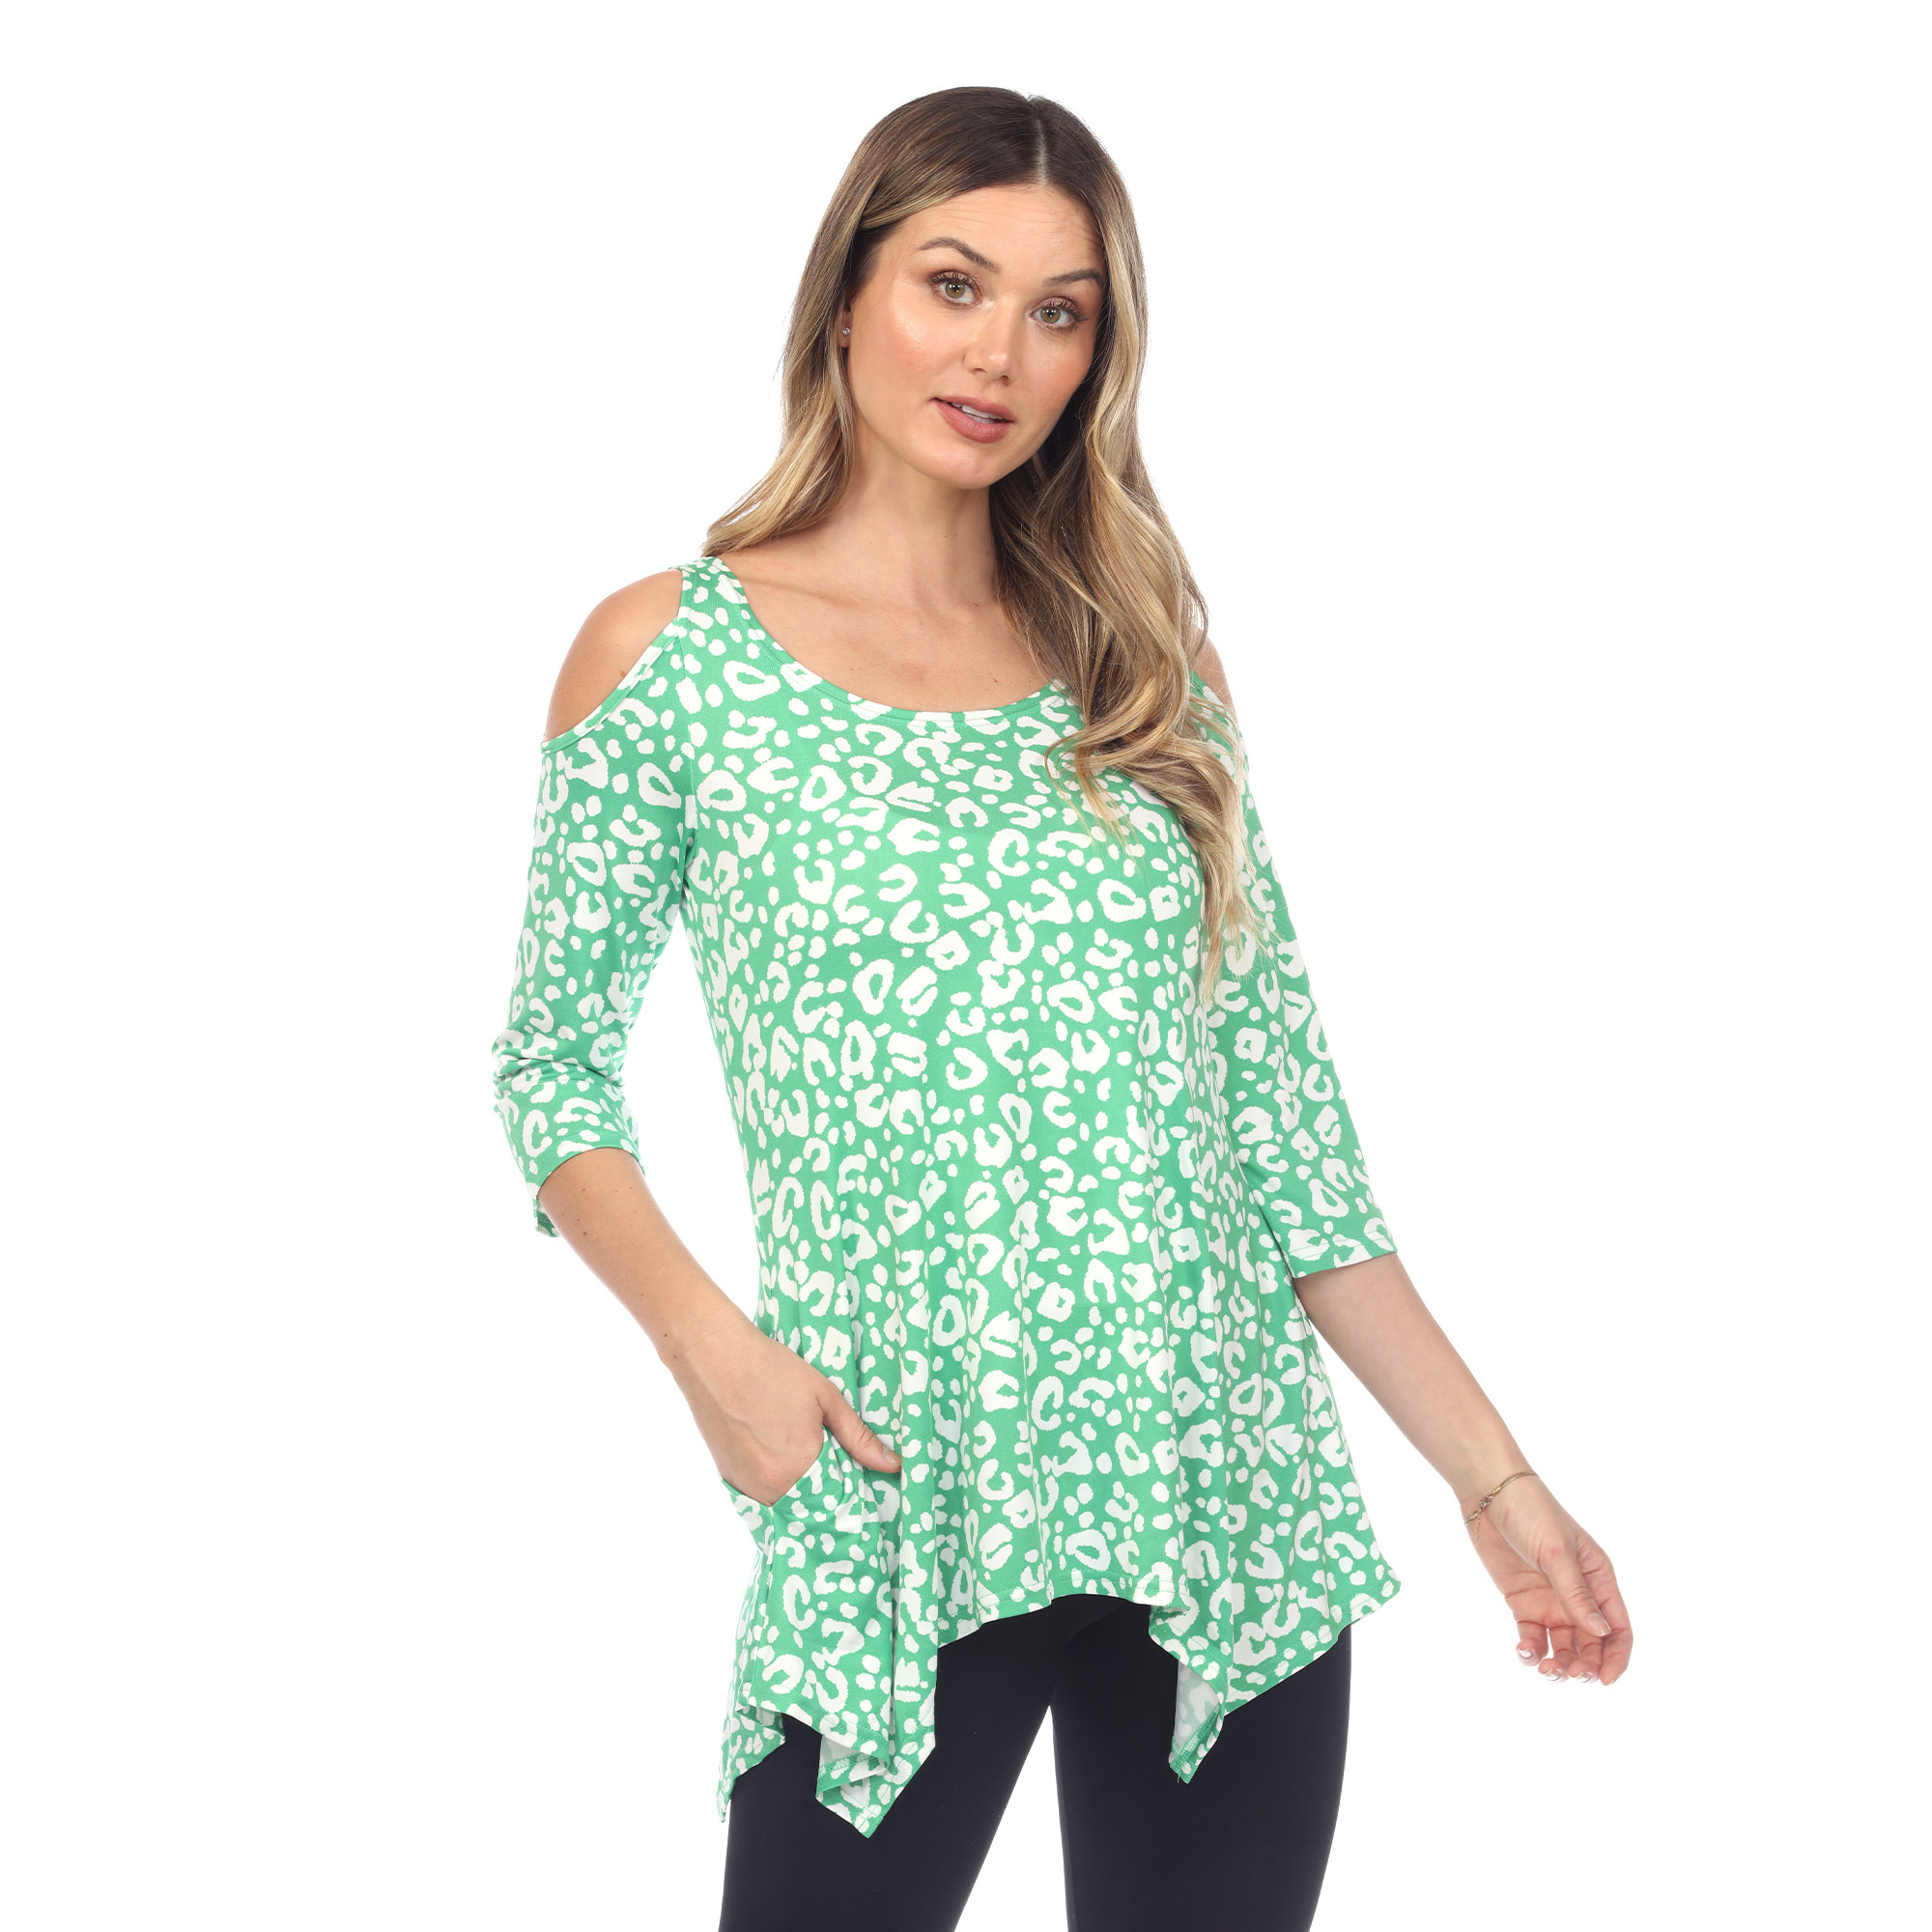 White Mark Women's Leopard Print Cold Shoulder Tunic Top With Pockets - Green, Large